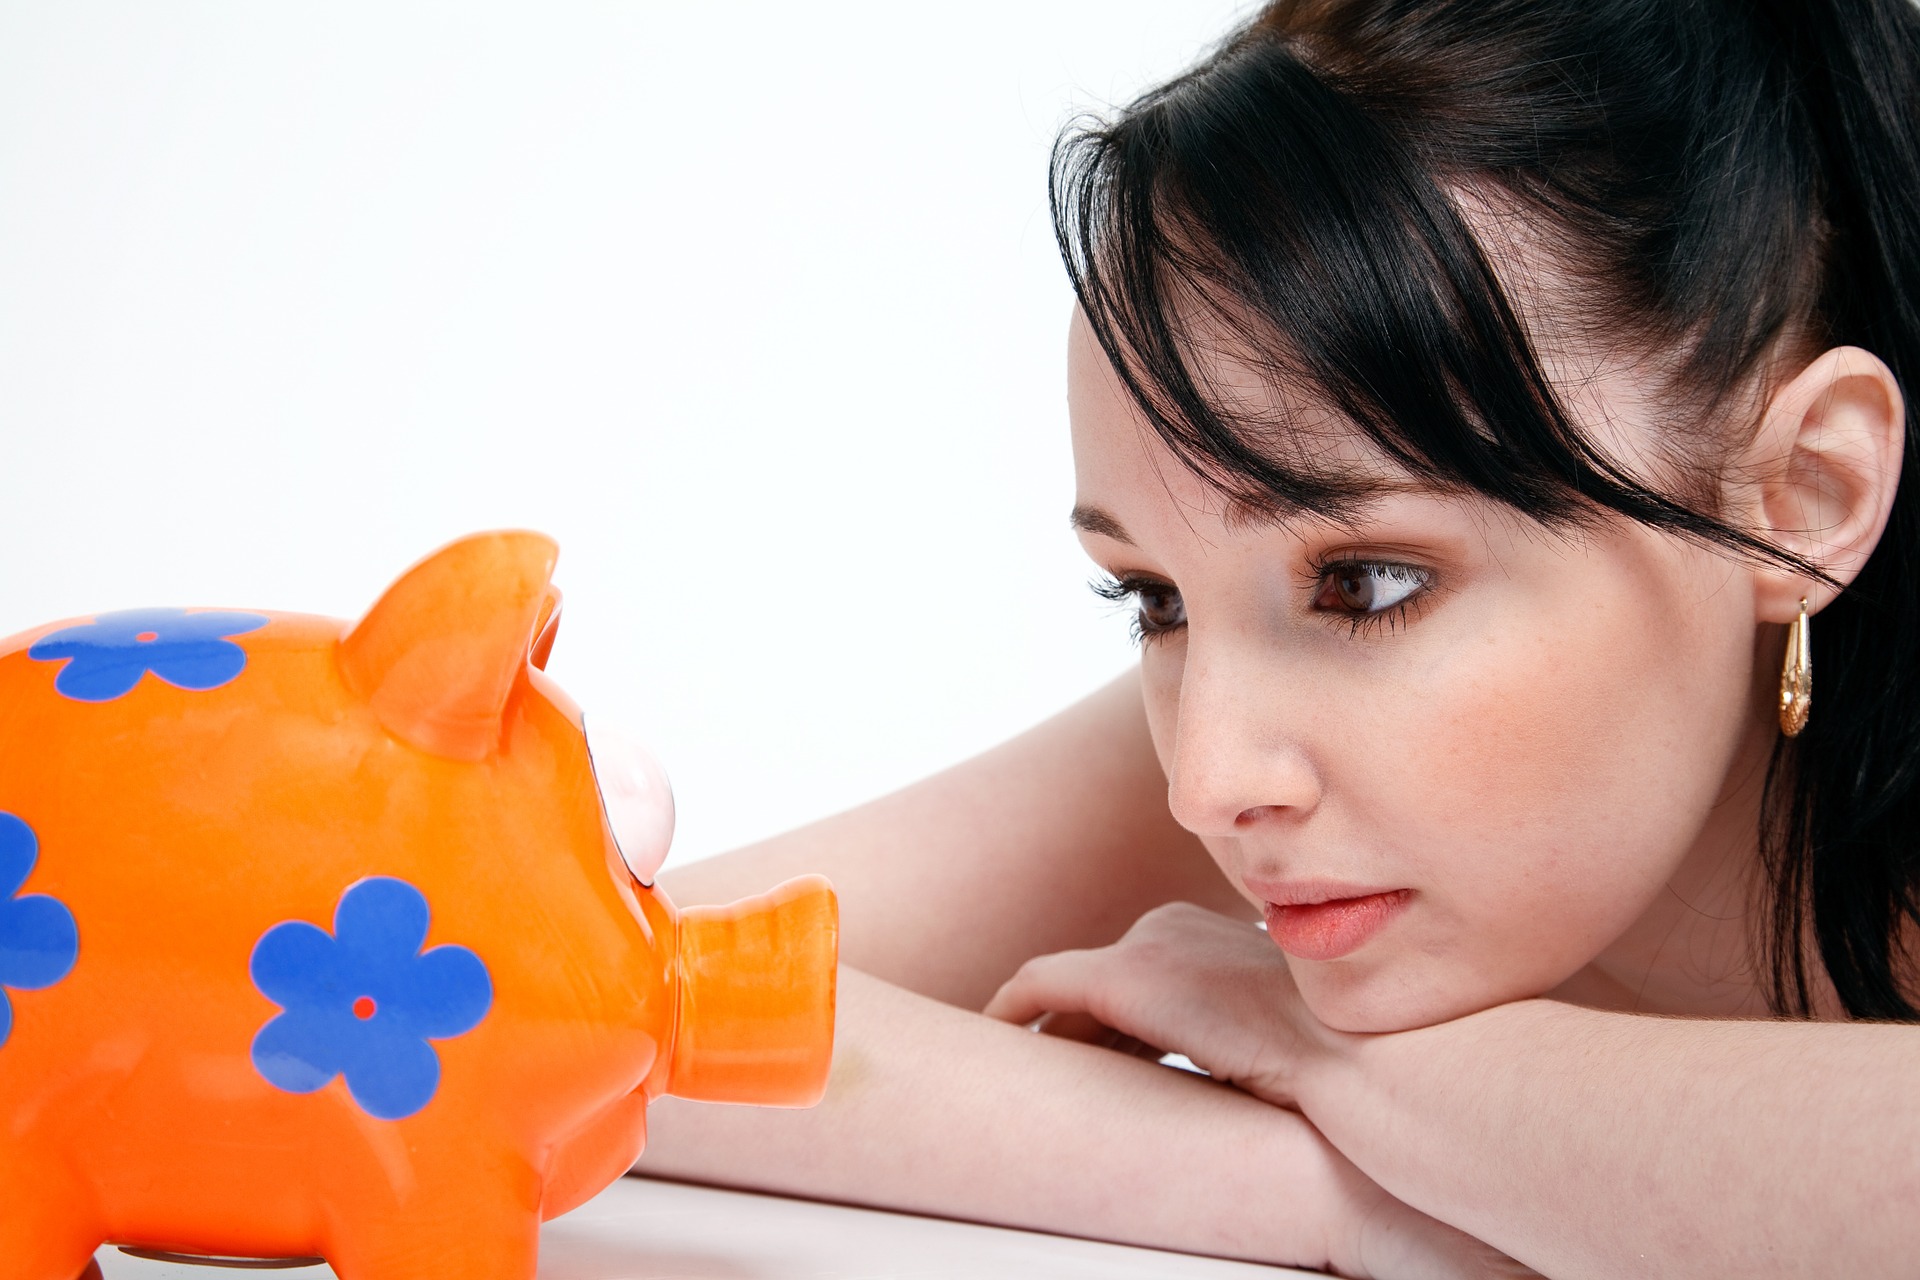 Woman stares at piggy bank: Does she want to save money?